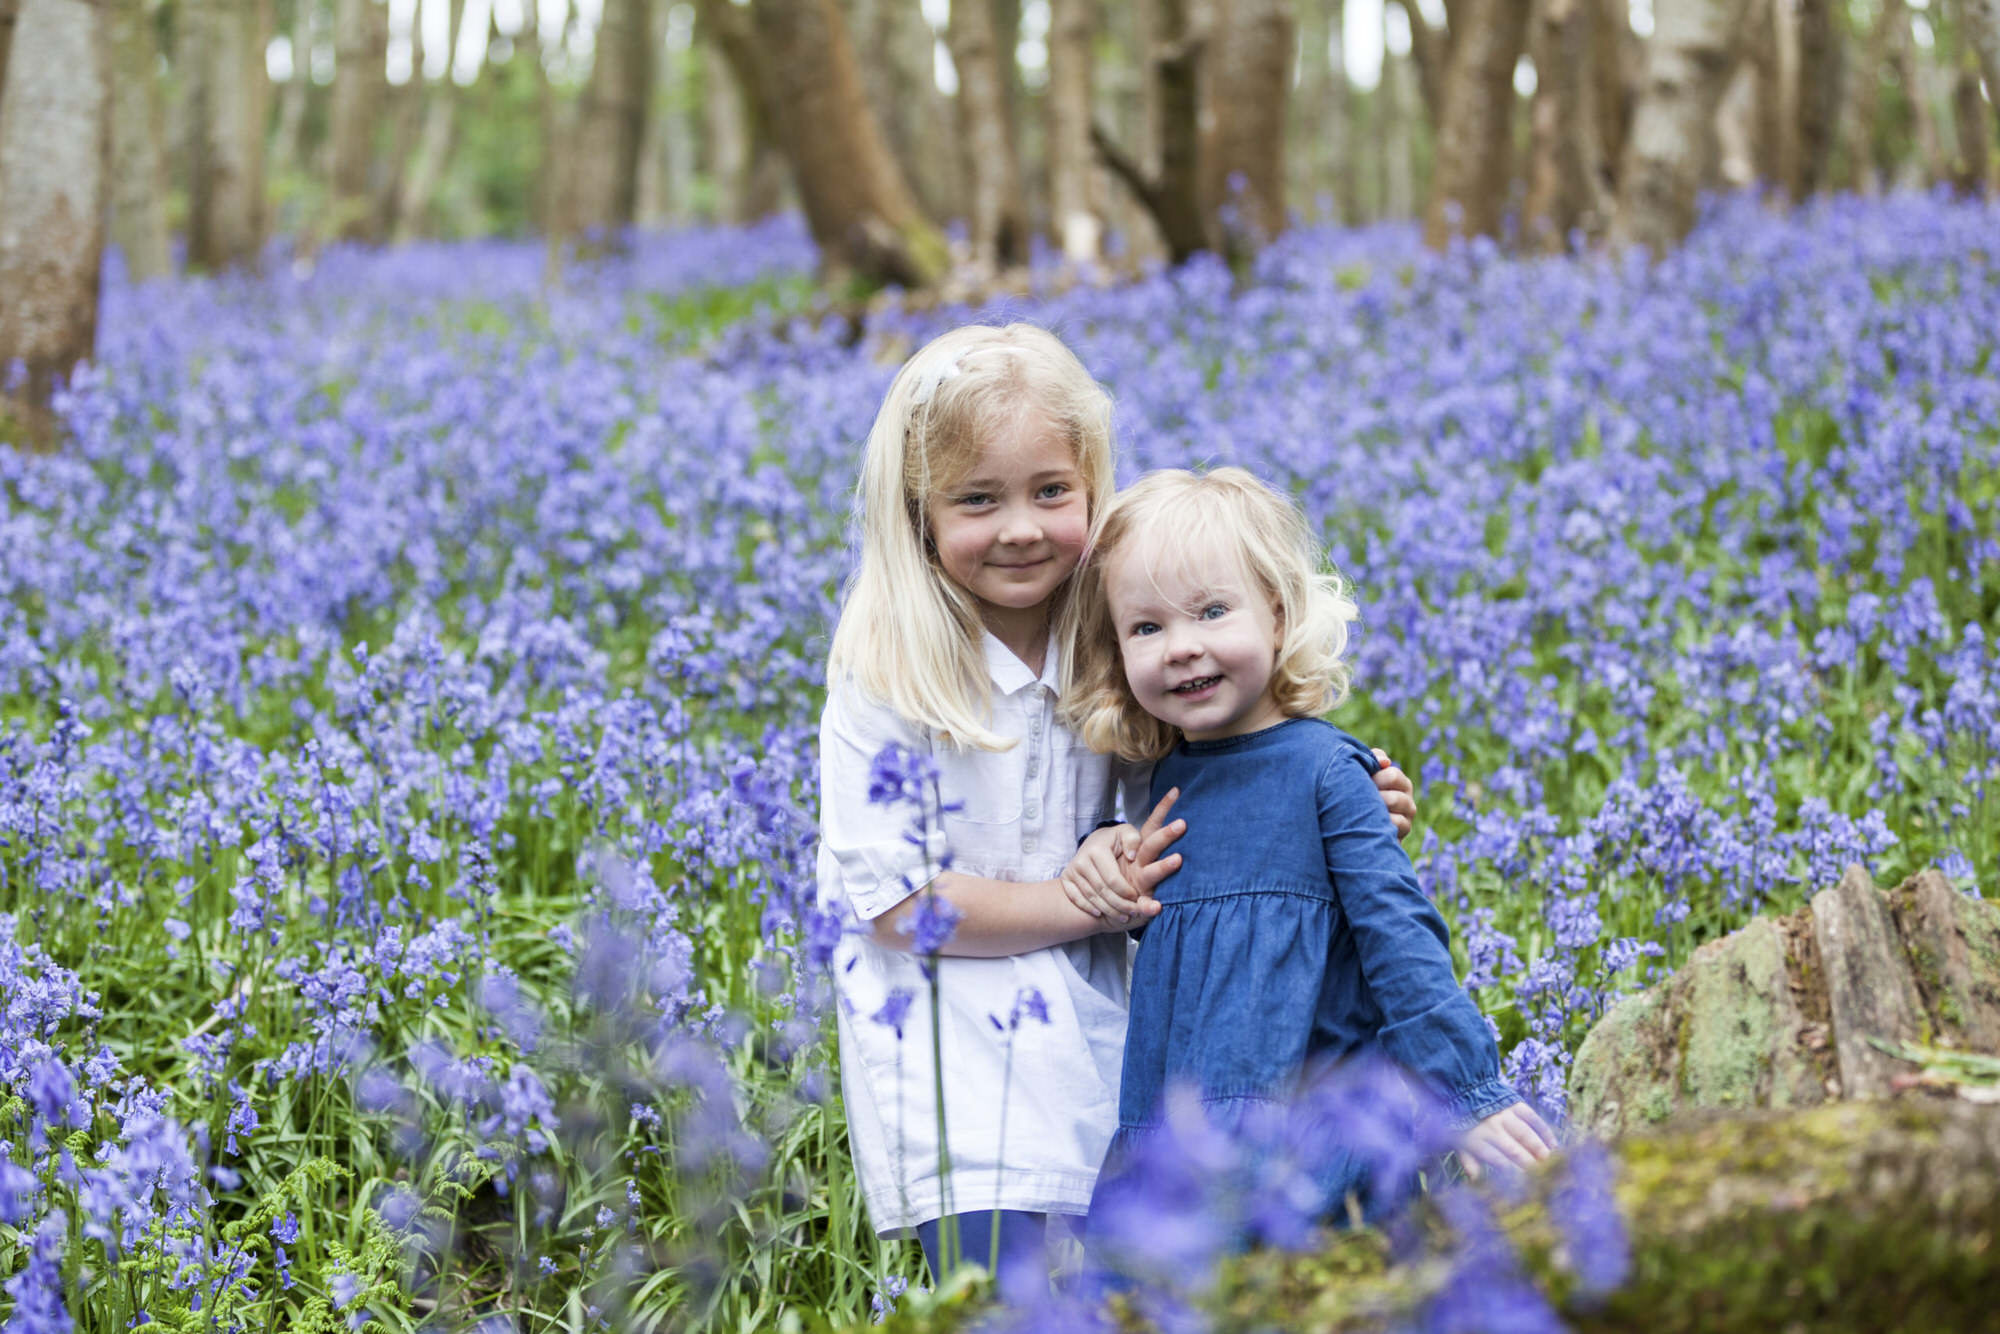 4 crazy days of bluebells 2019 – 2021 dates now booking!